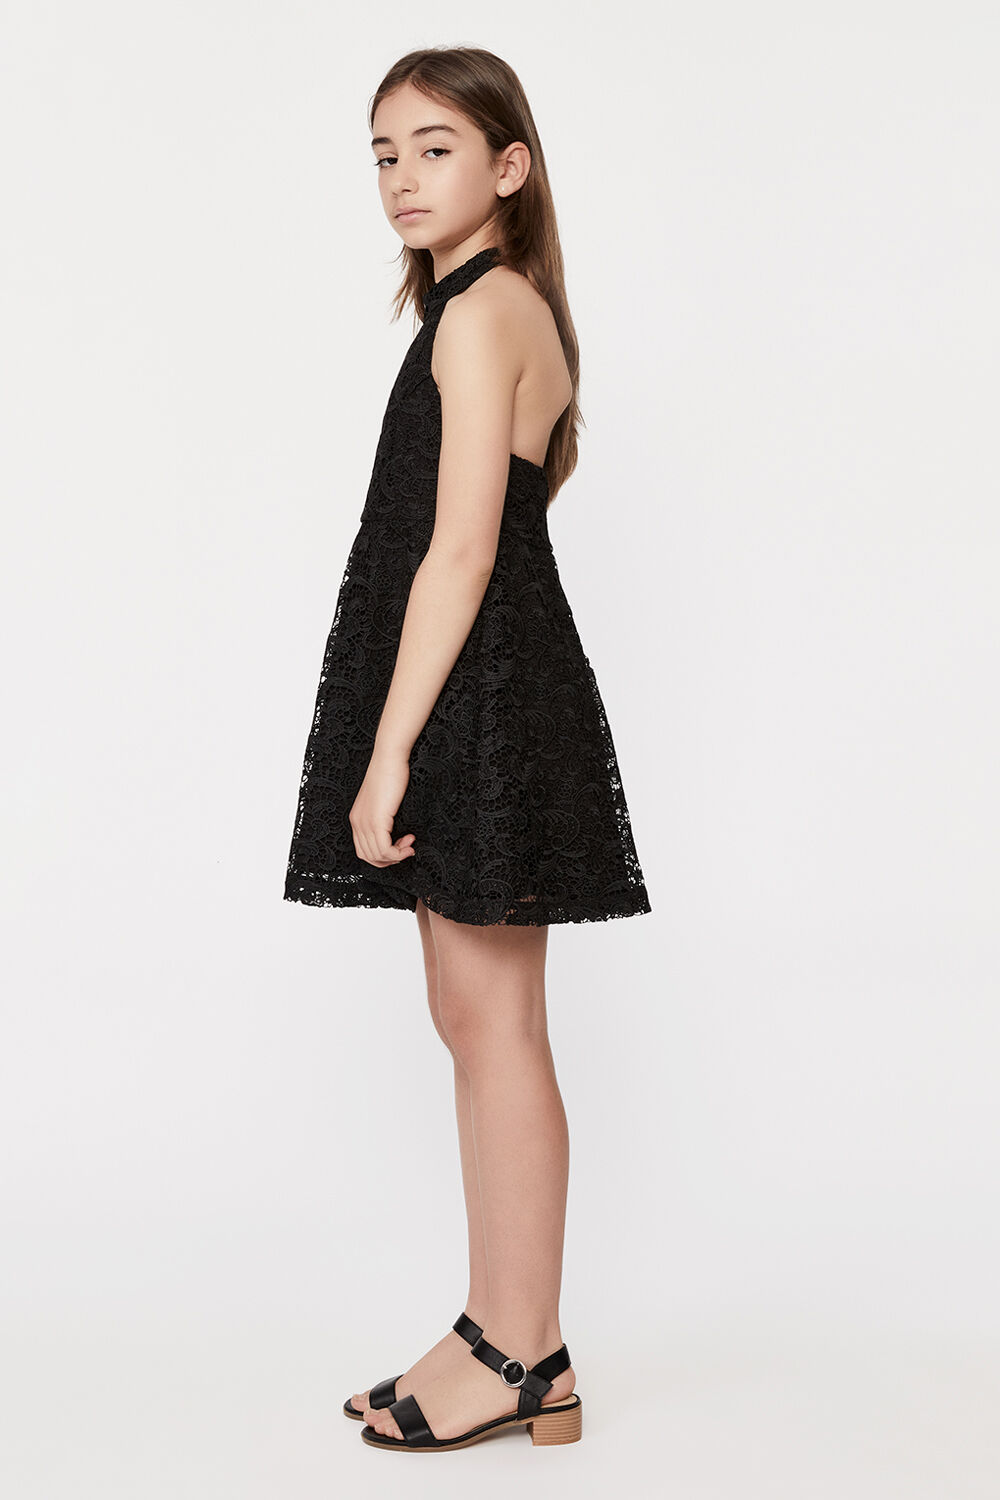 GIRLS VICTORIA LILIES LACE DRESS  in colour CAVIAR